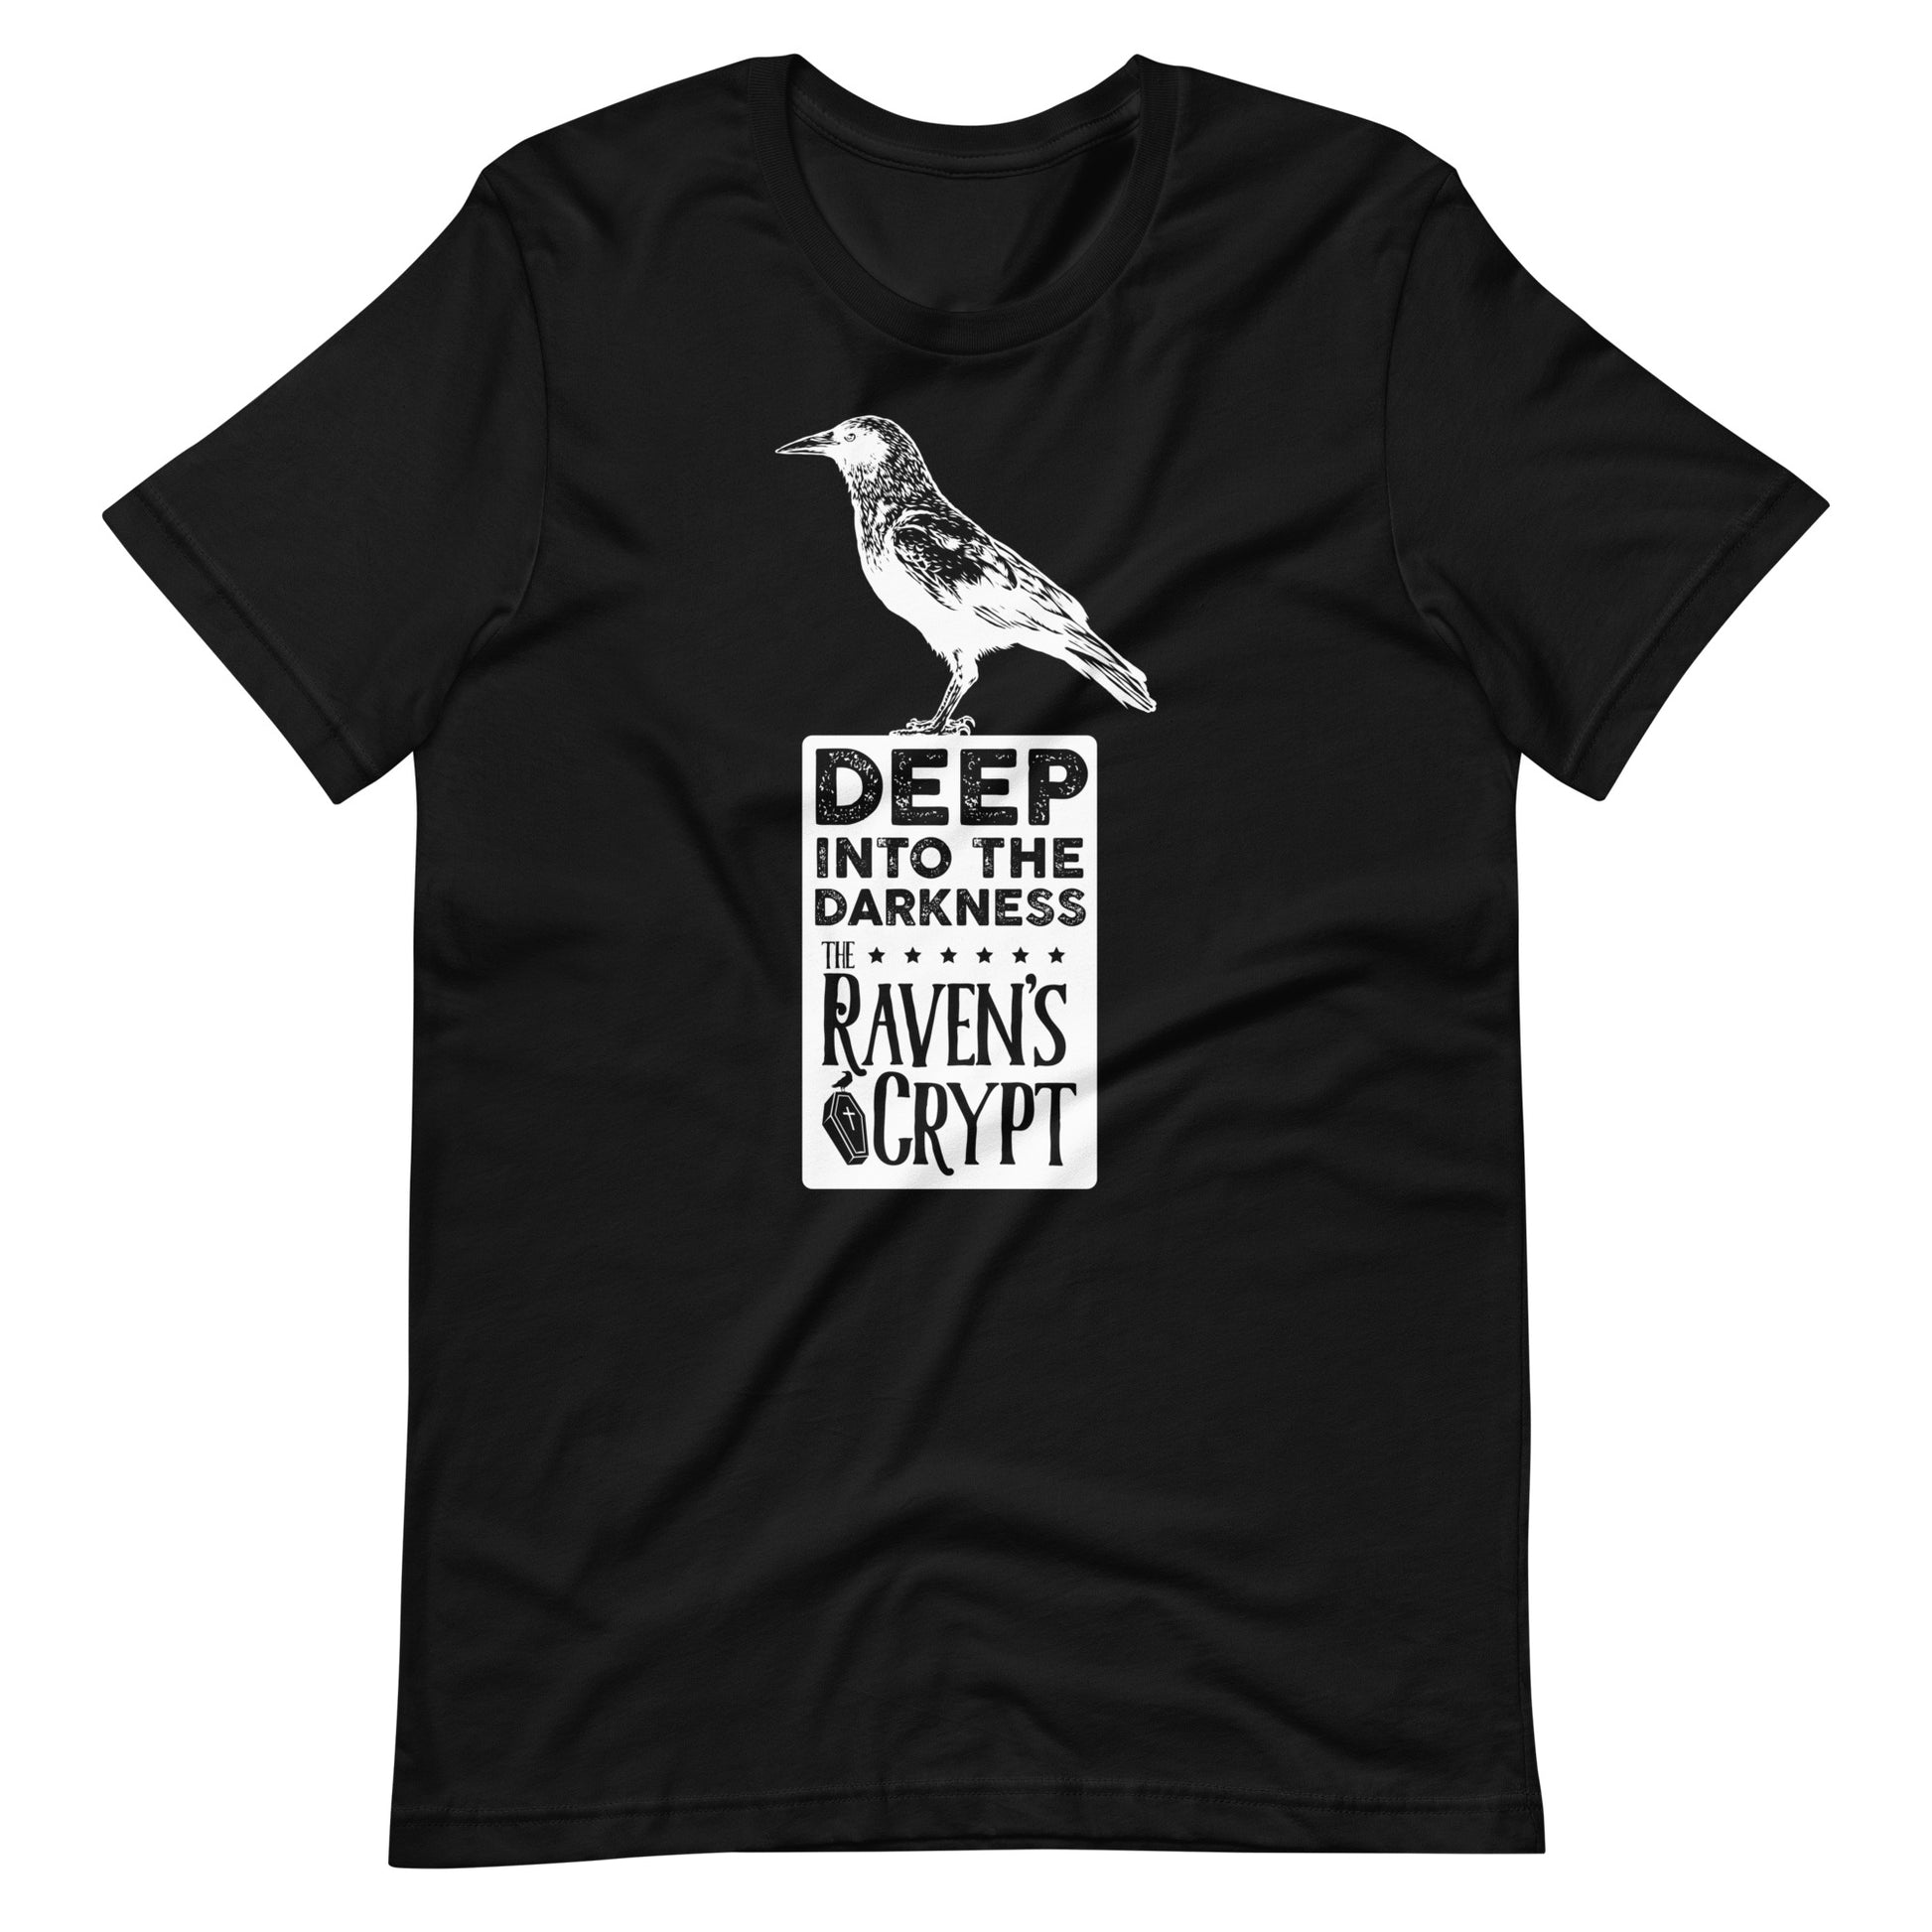 Deep Into the Darkness Crypt 2 - Men's t-shirt - Black Front